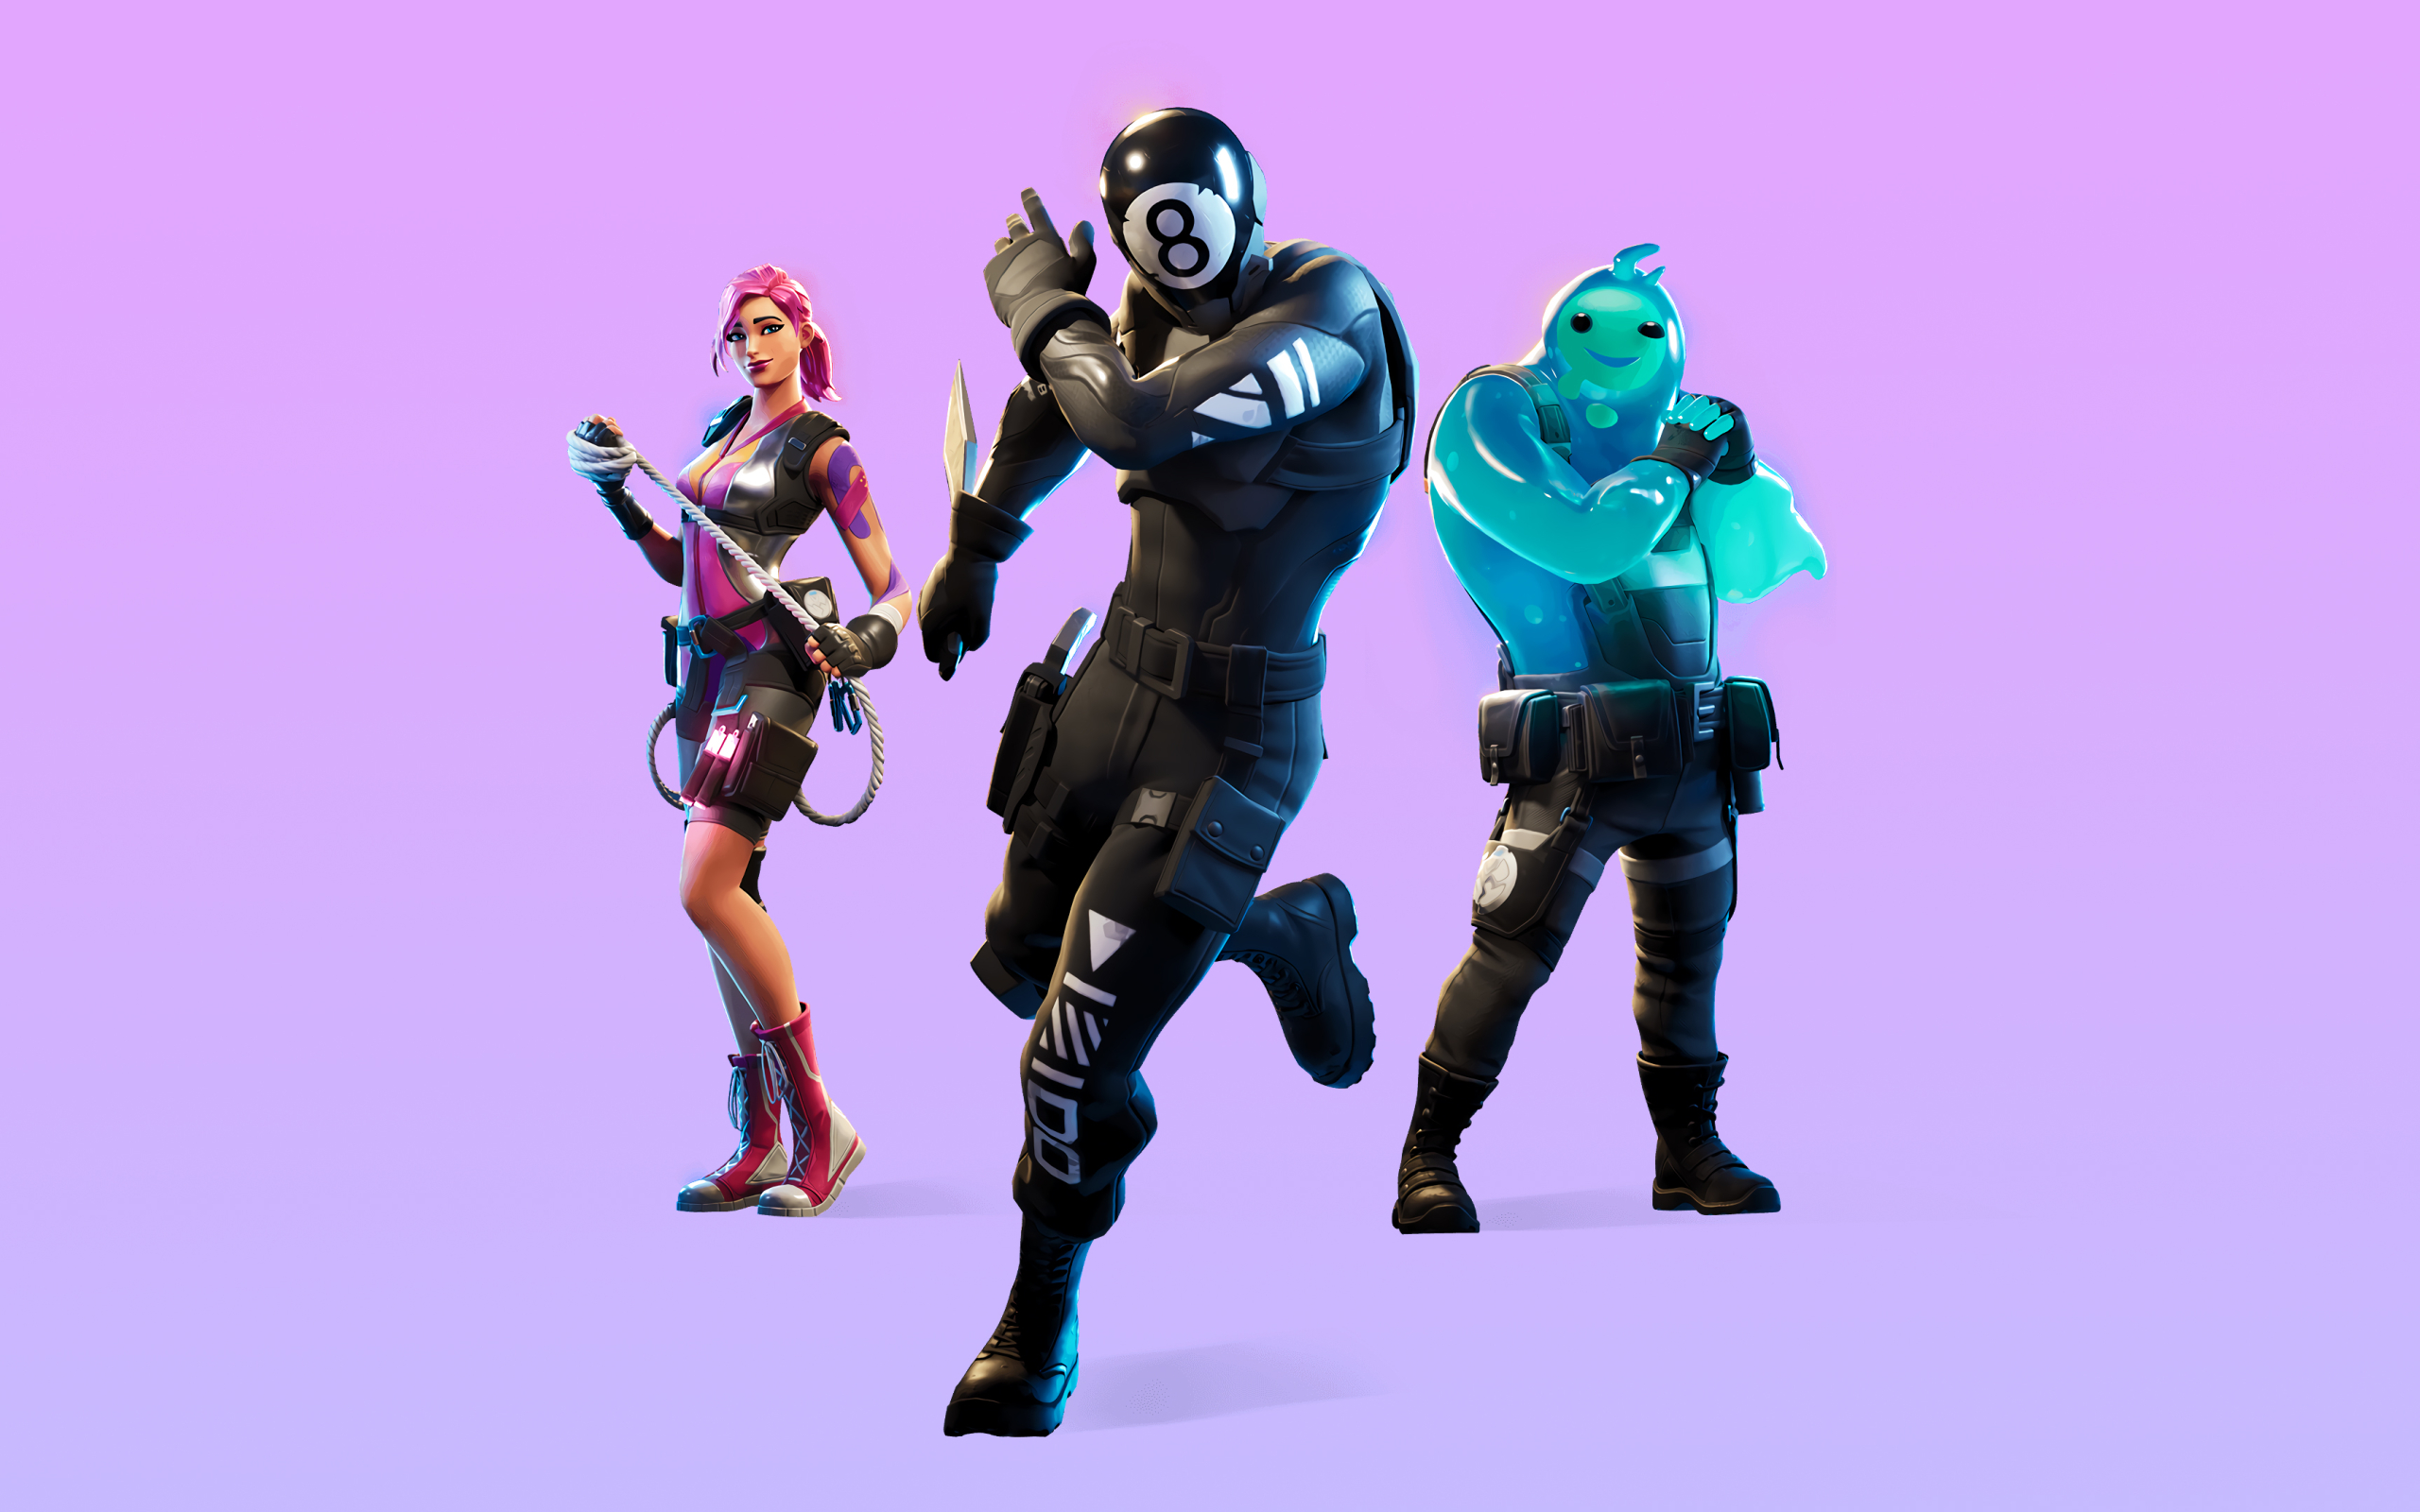 what was the chapter 1 season 1 battle pass